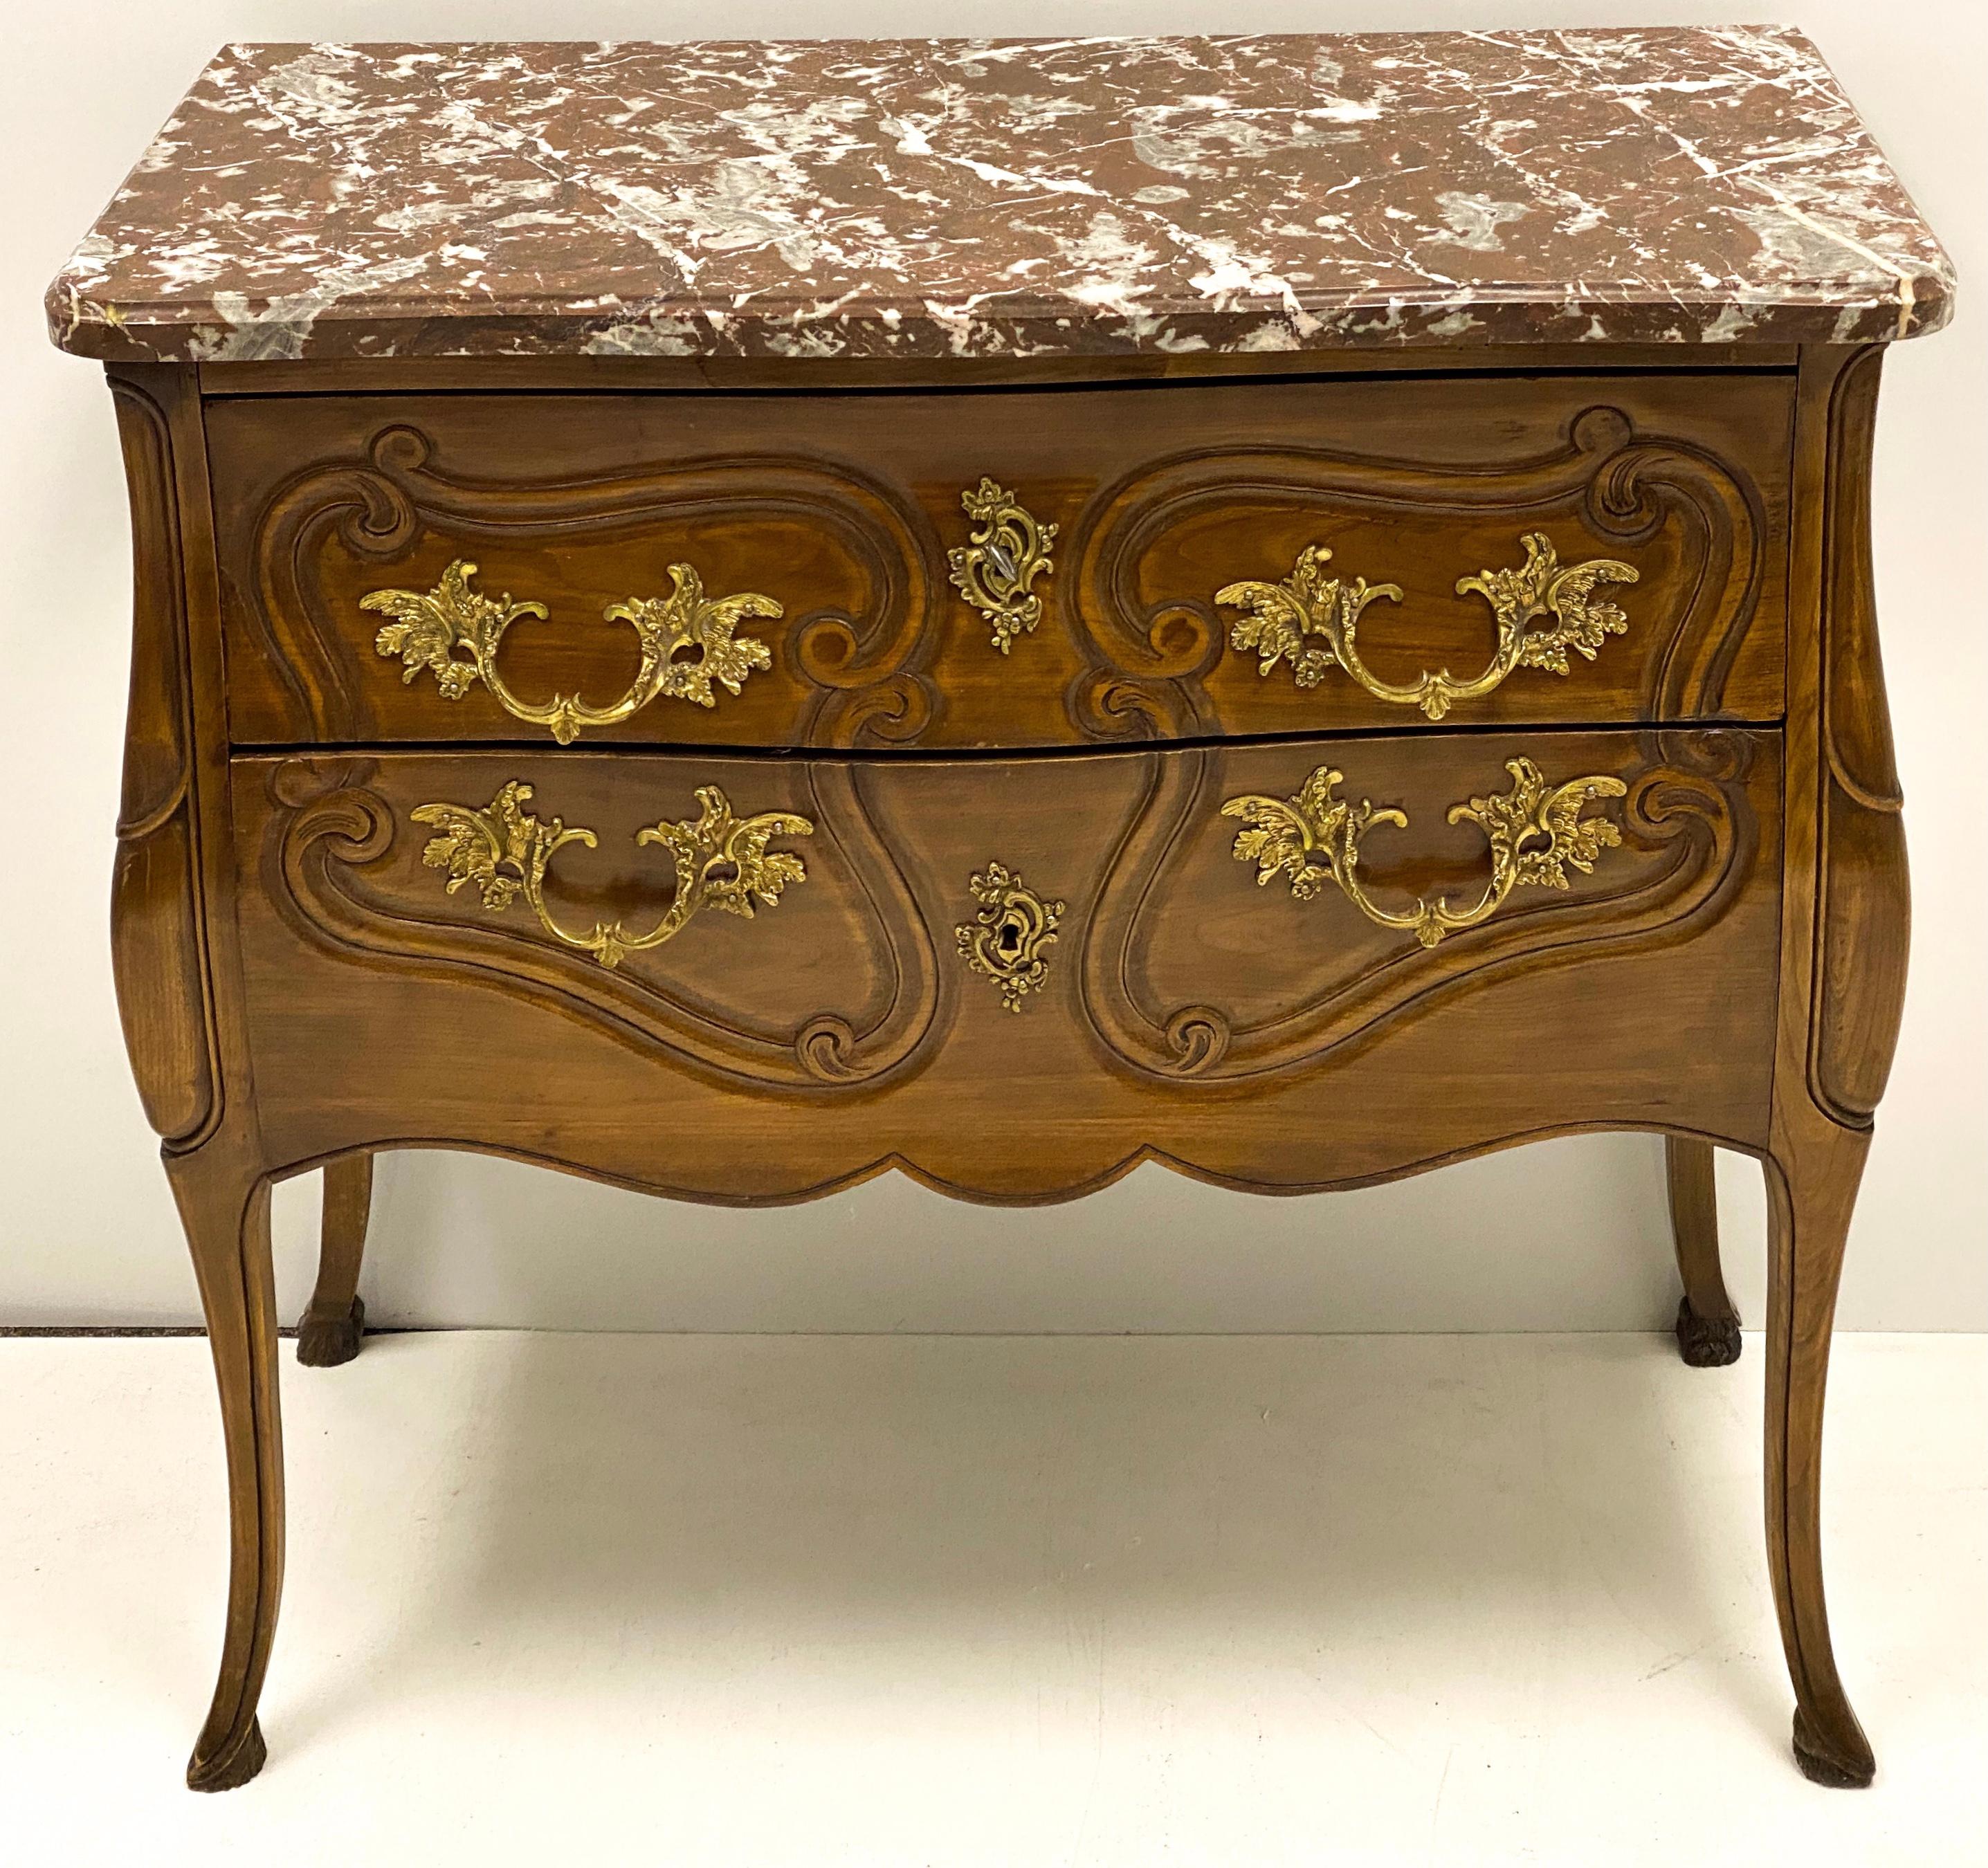 20th Century Italian Carved Walnut Rouge Marble Top Commode with French Styling For Sale